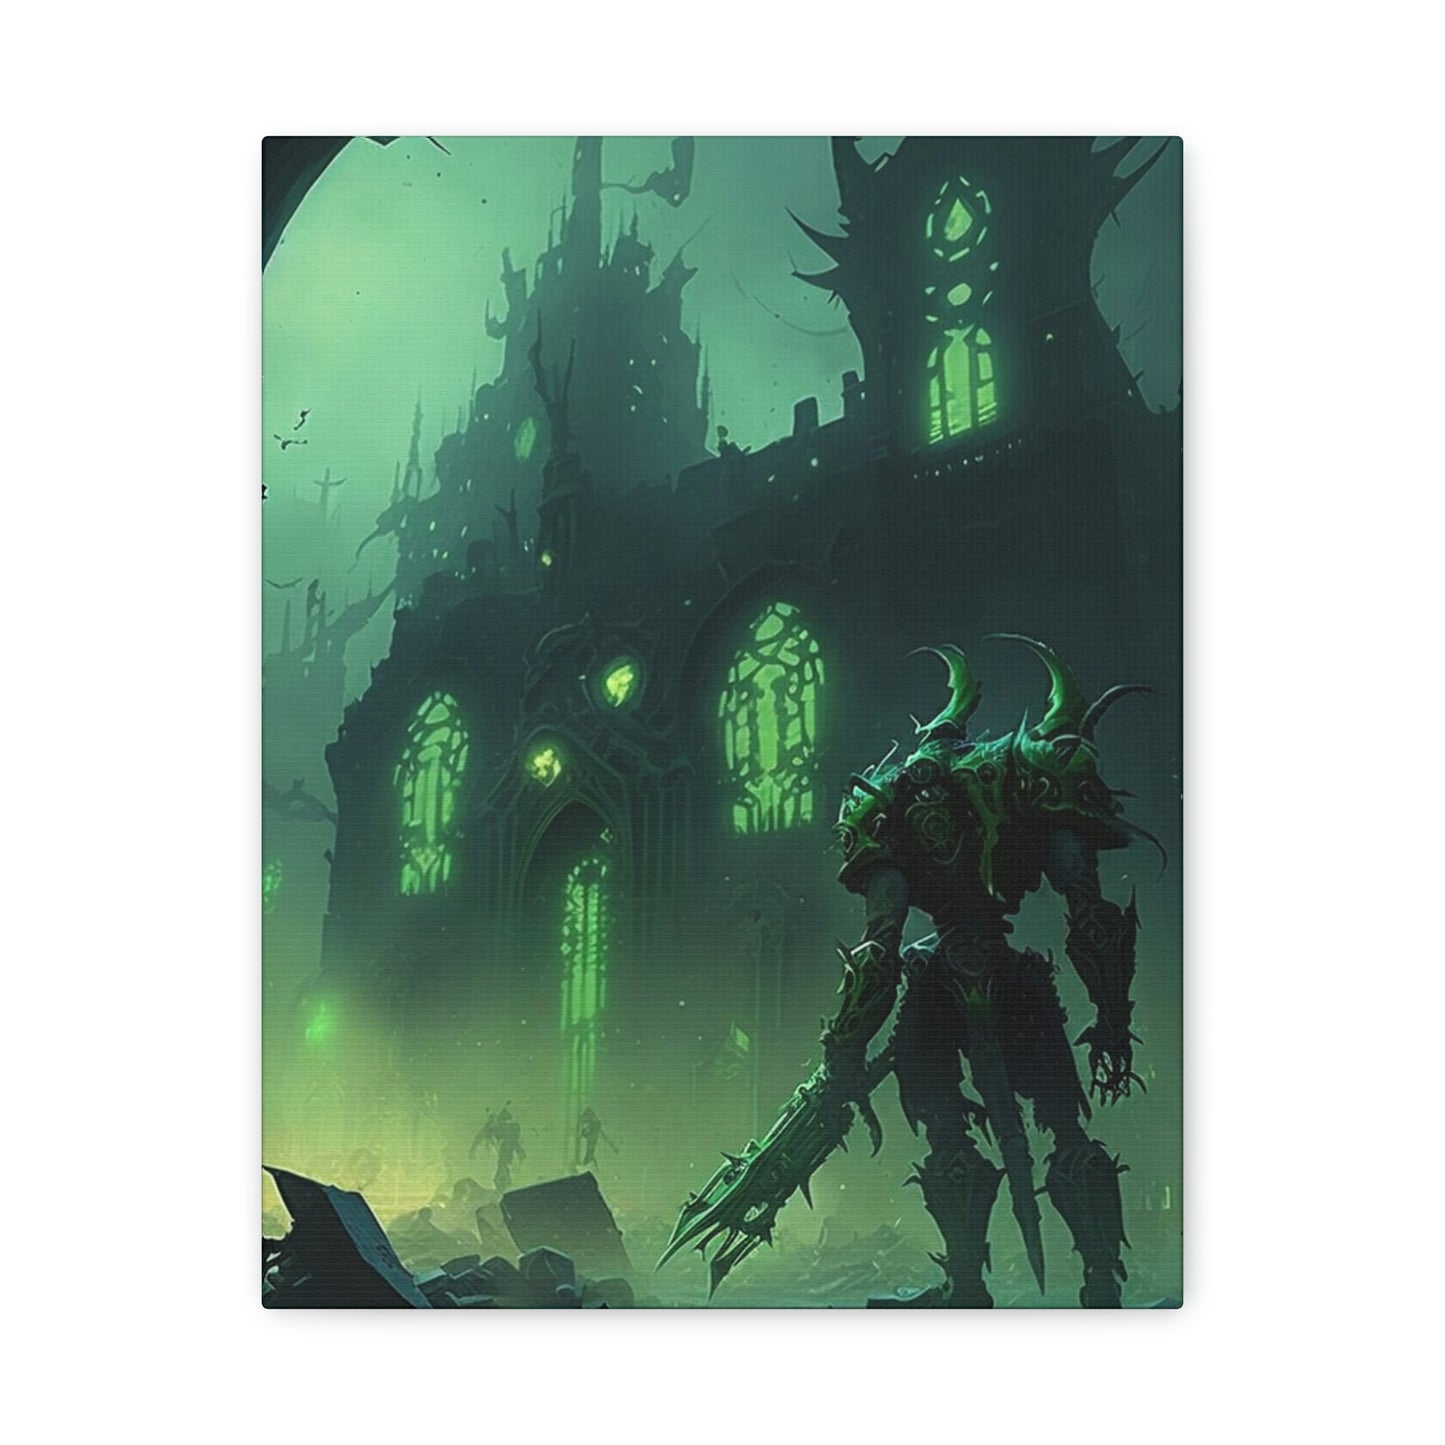 Necron City at Night Painting: A Breathtaking View of the Grim Darkness of Warhammer 40k